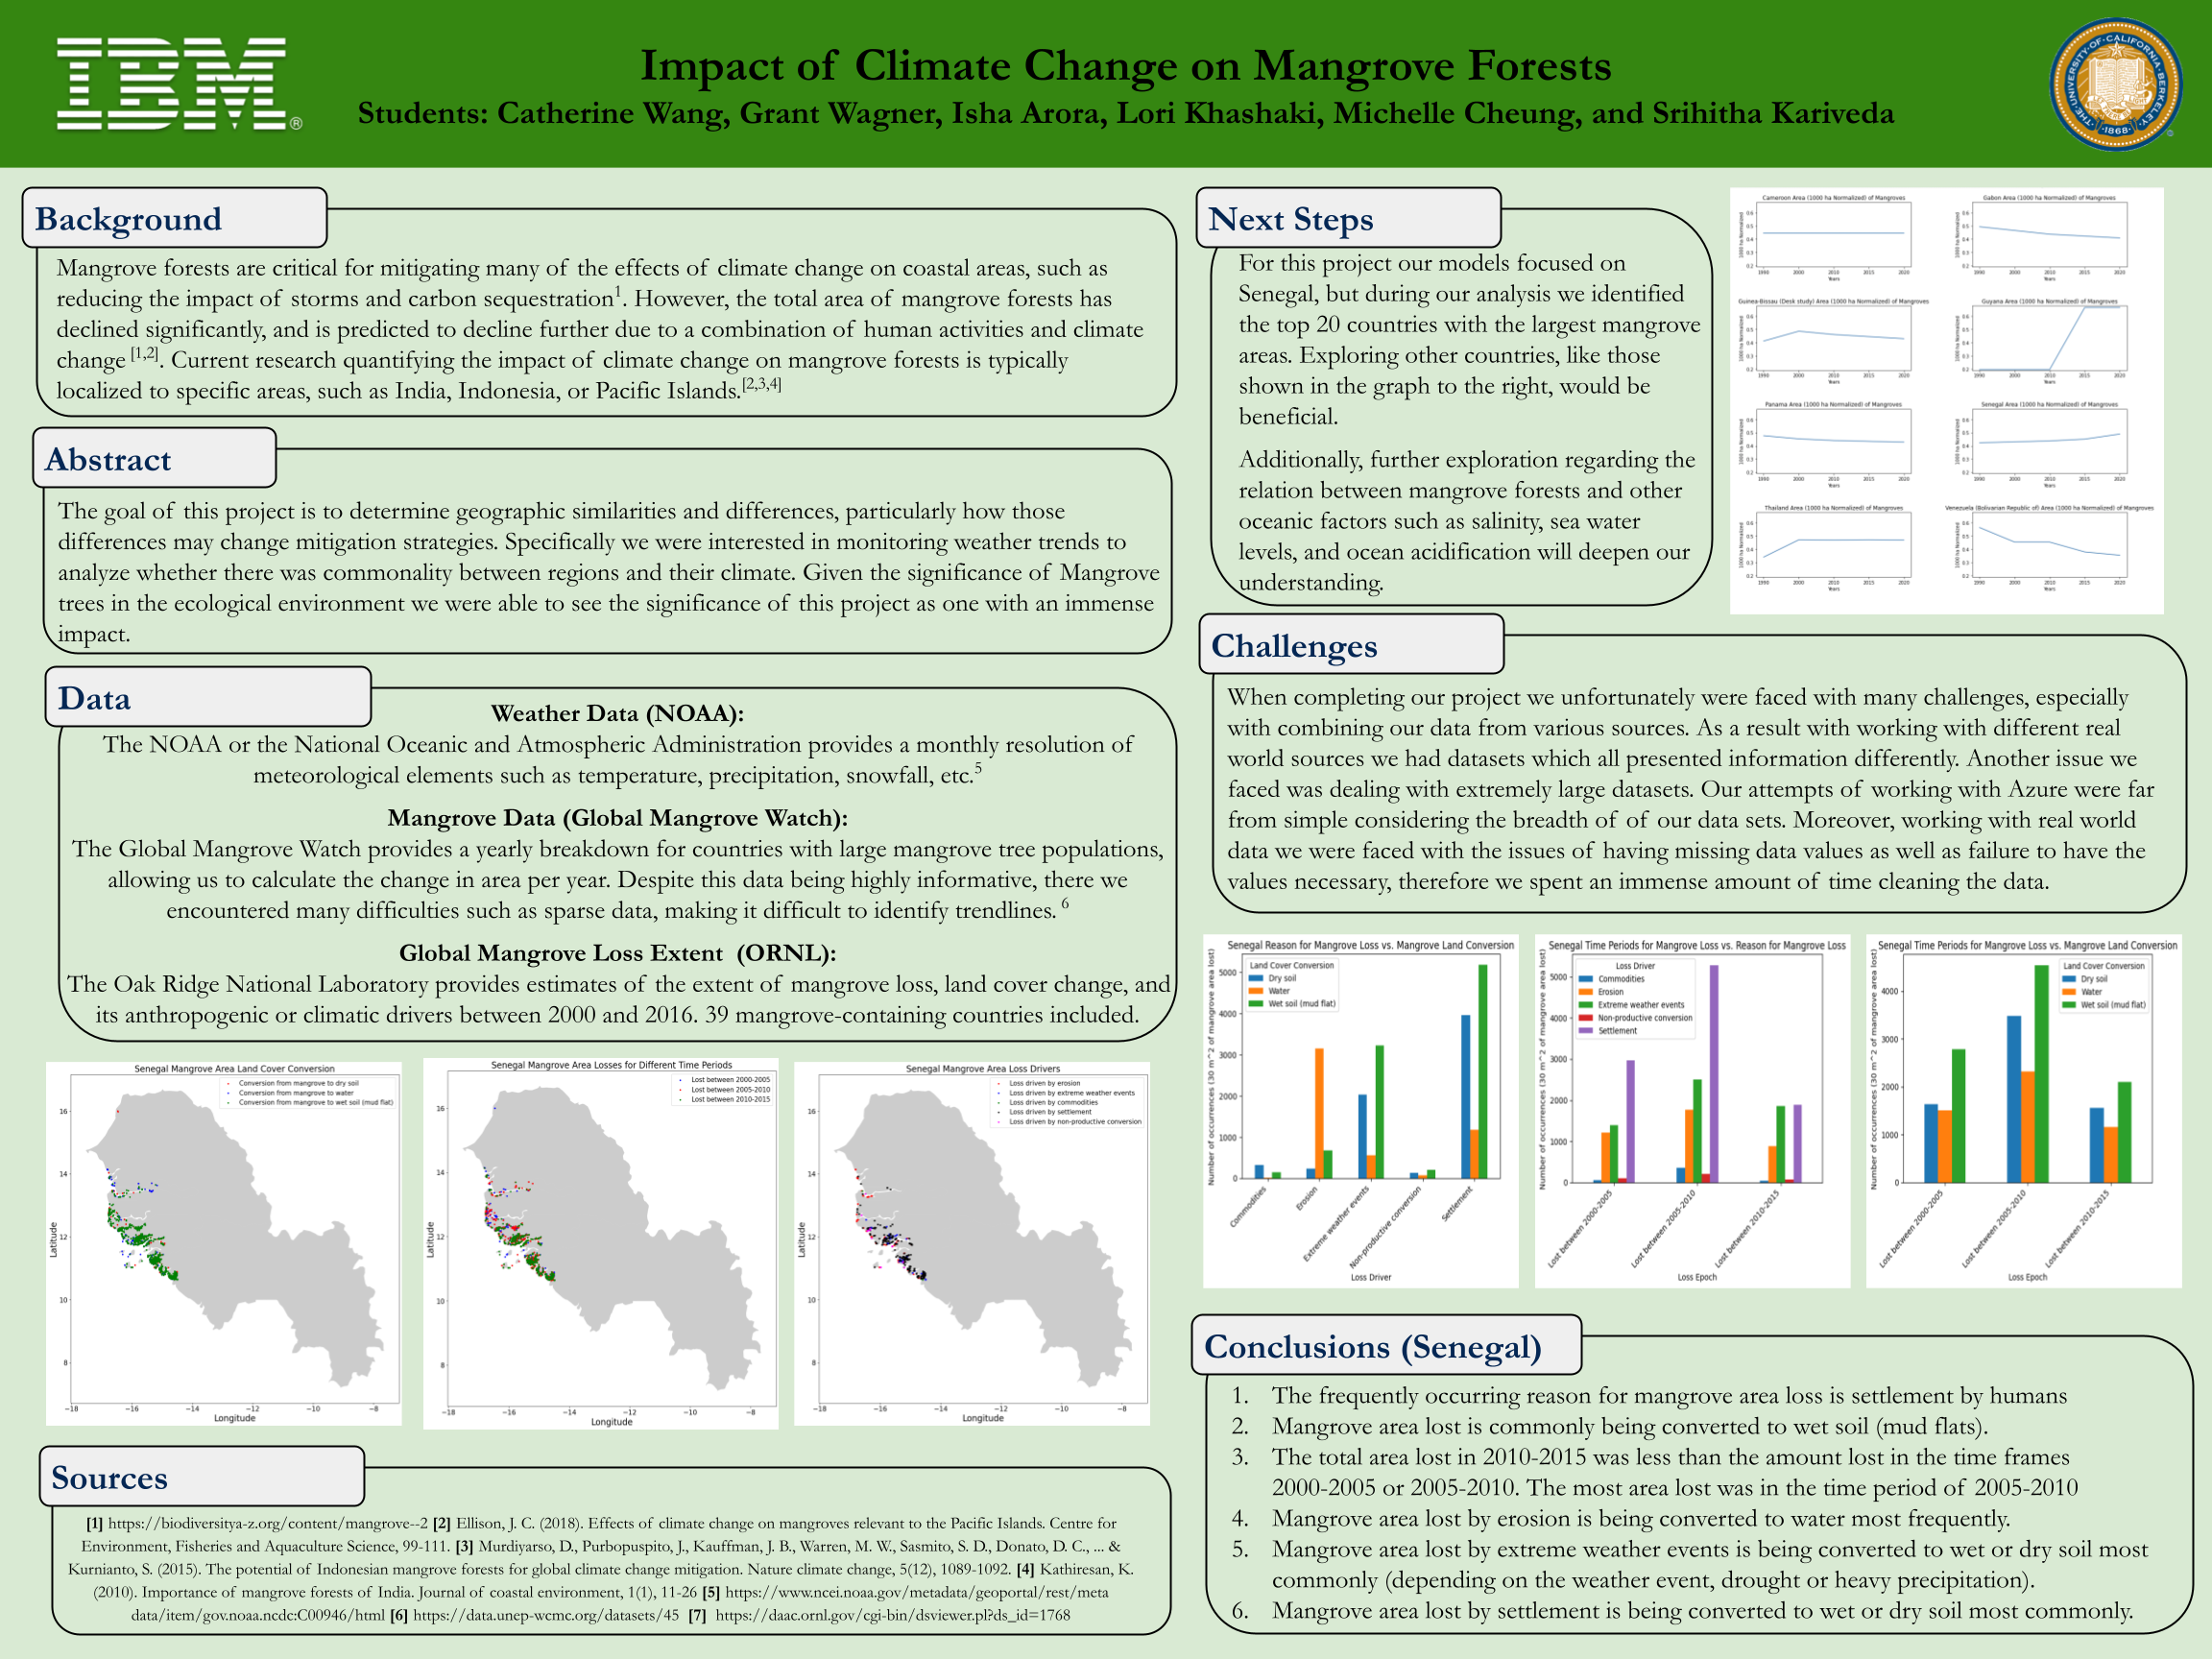 [IBM] Impact of Climate Change on Mangrove Forests - Fall 2022 Discovery Project